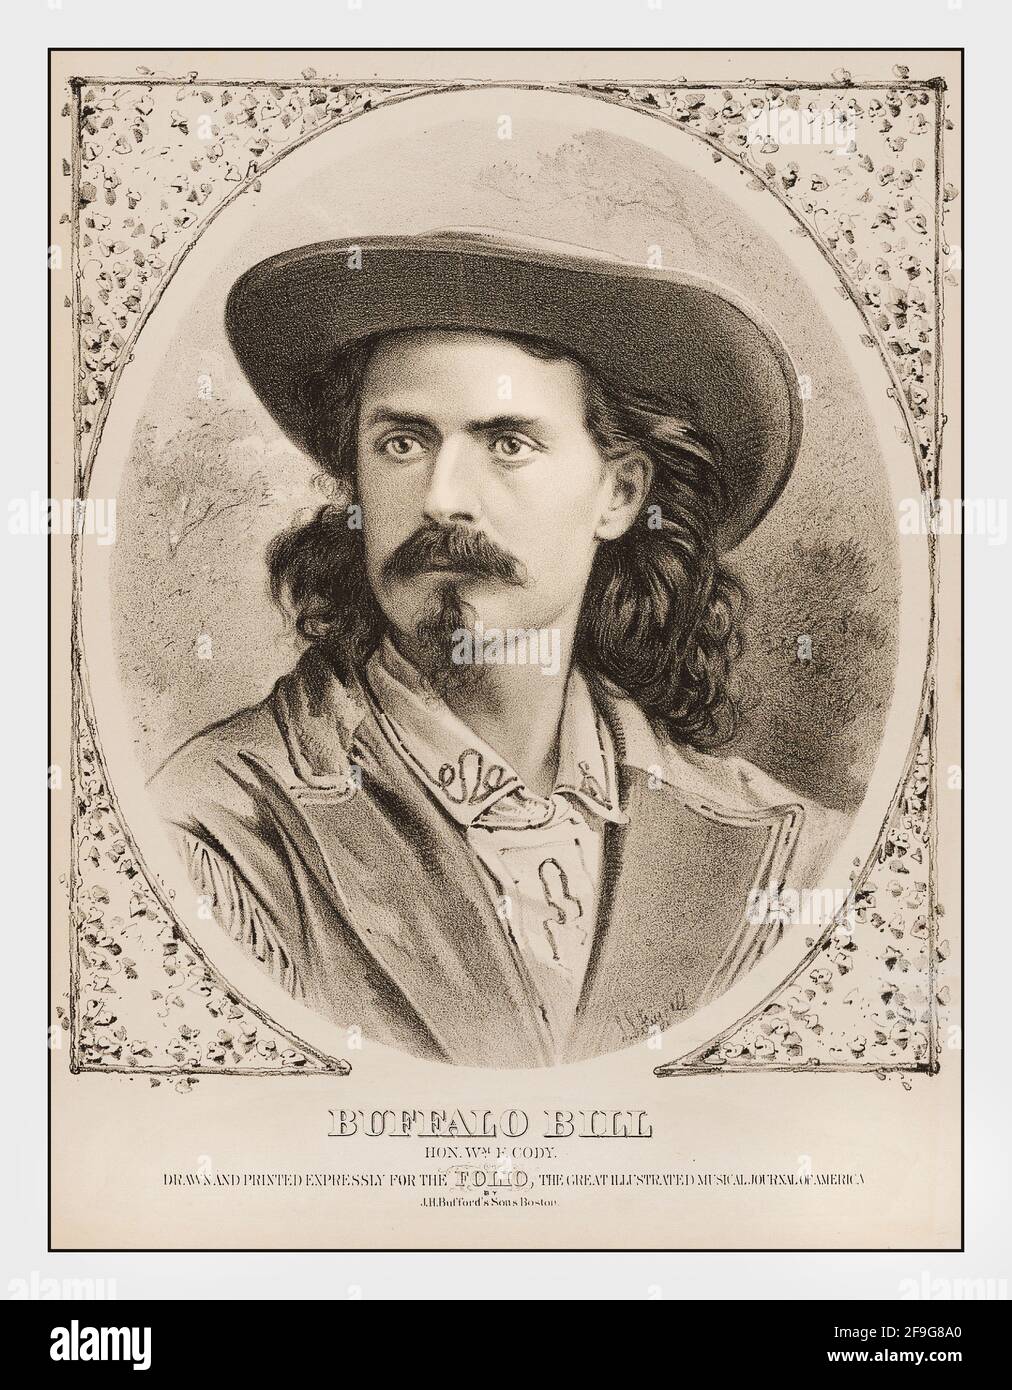 BUFFALO BILL Vintage 1860's etching print poster of Buffalo Bill  William Frederick Cody. Known as Buffalo Bill an American frontiersman and showman Stock Photo